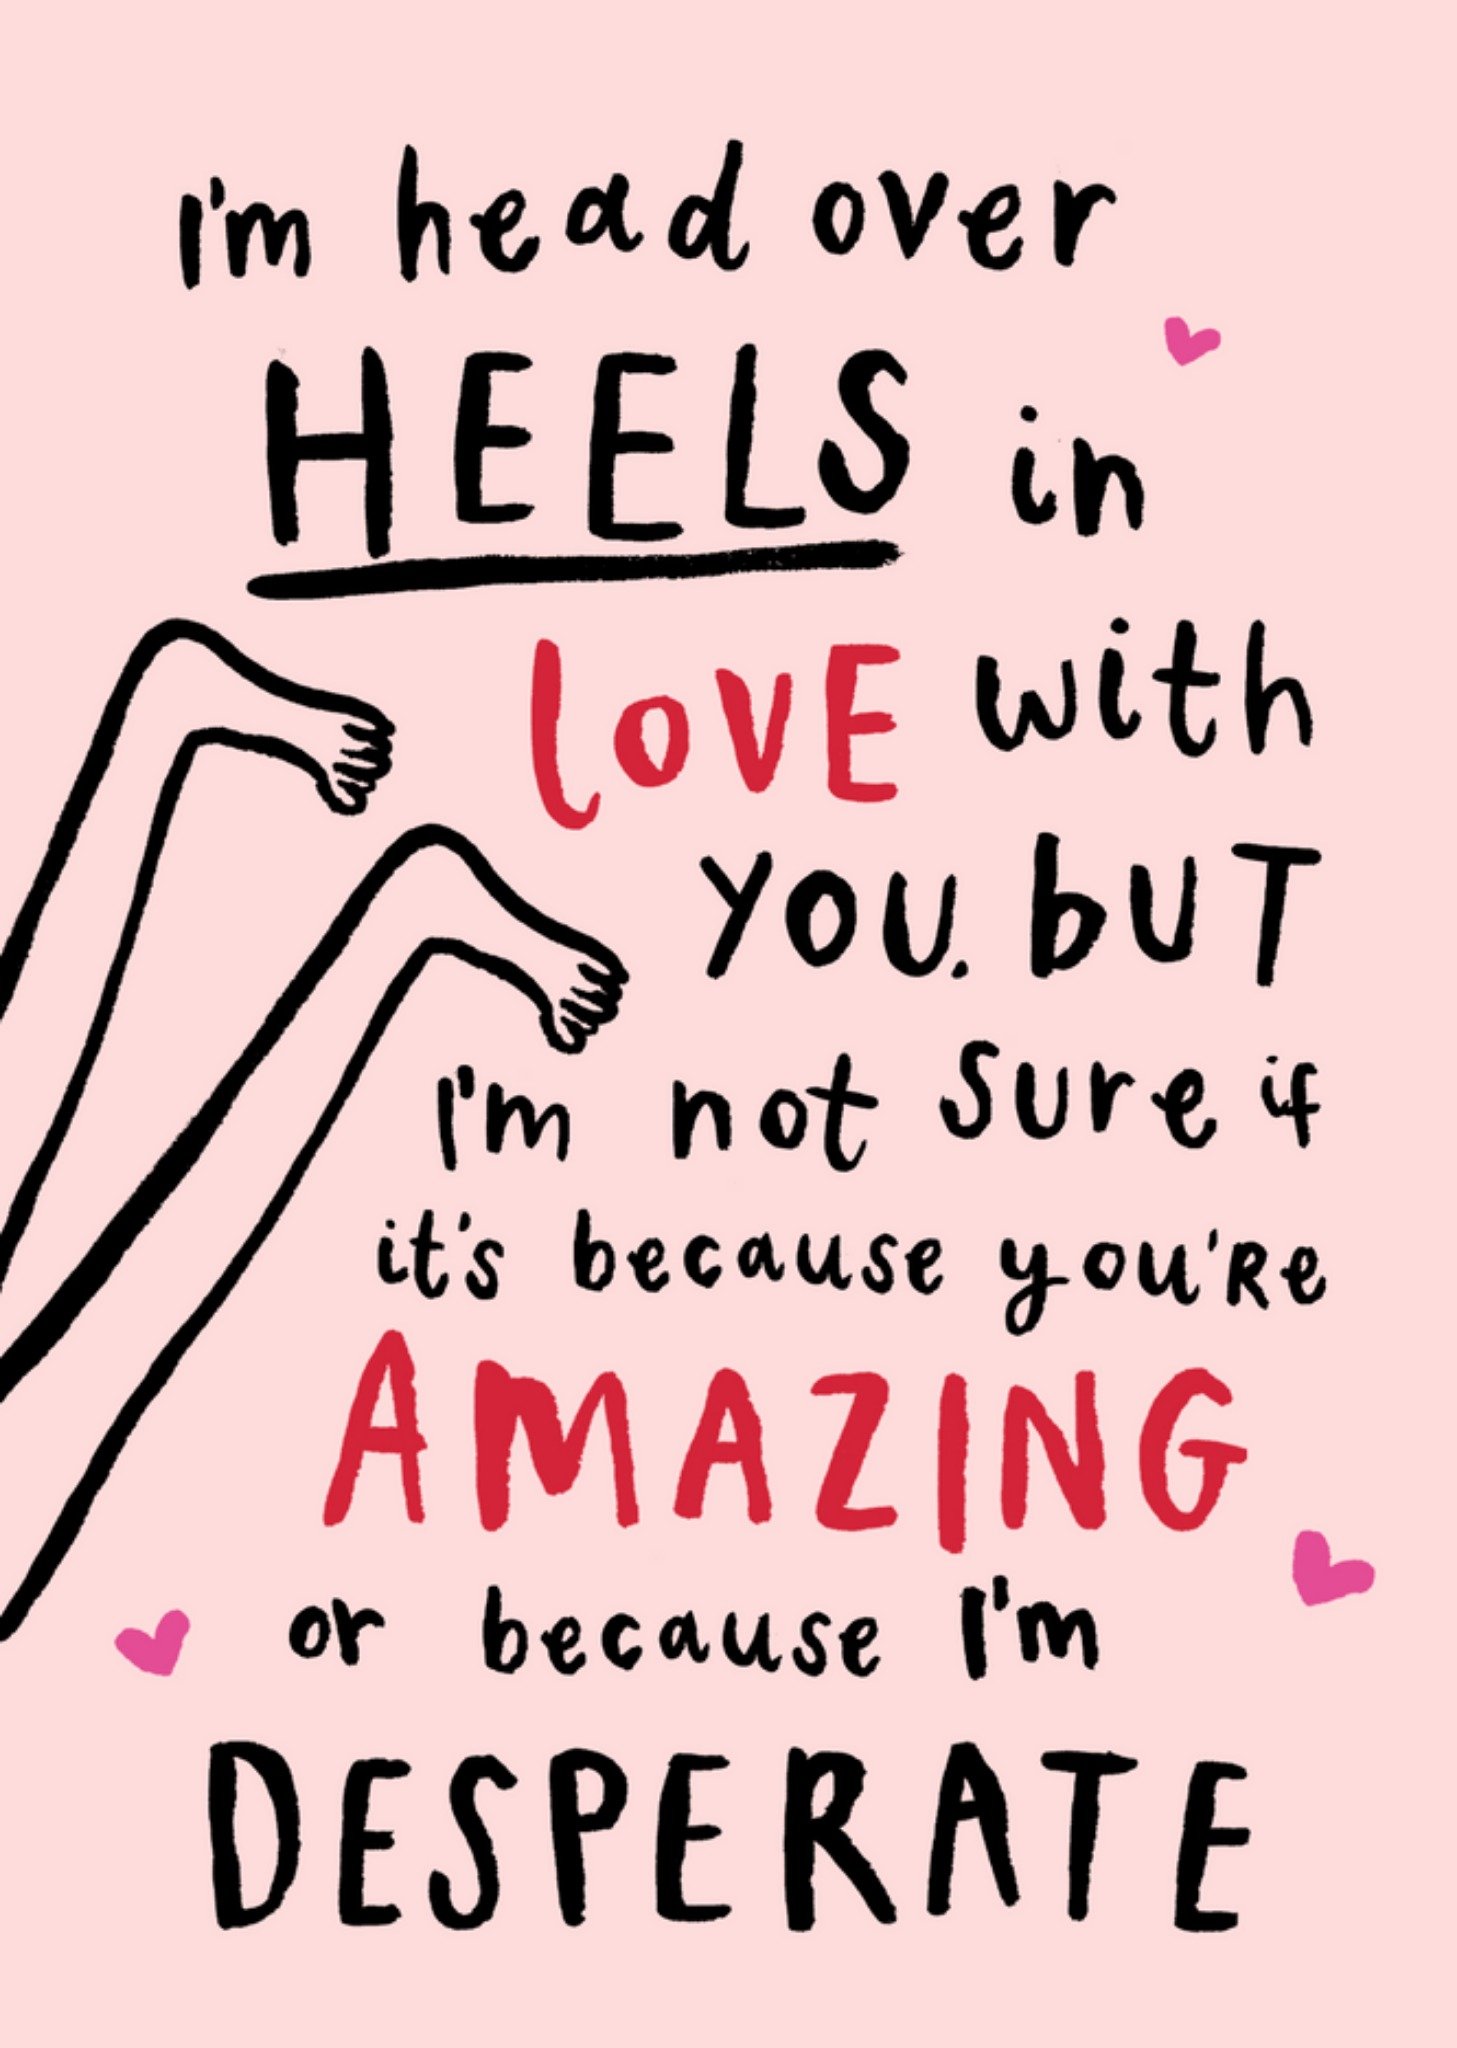 Moonpig Funny Head Over Heels In Love With You Hand Drawn Typography Valentine's Day Card, Large